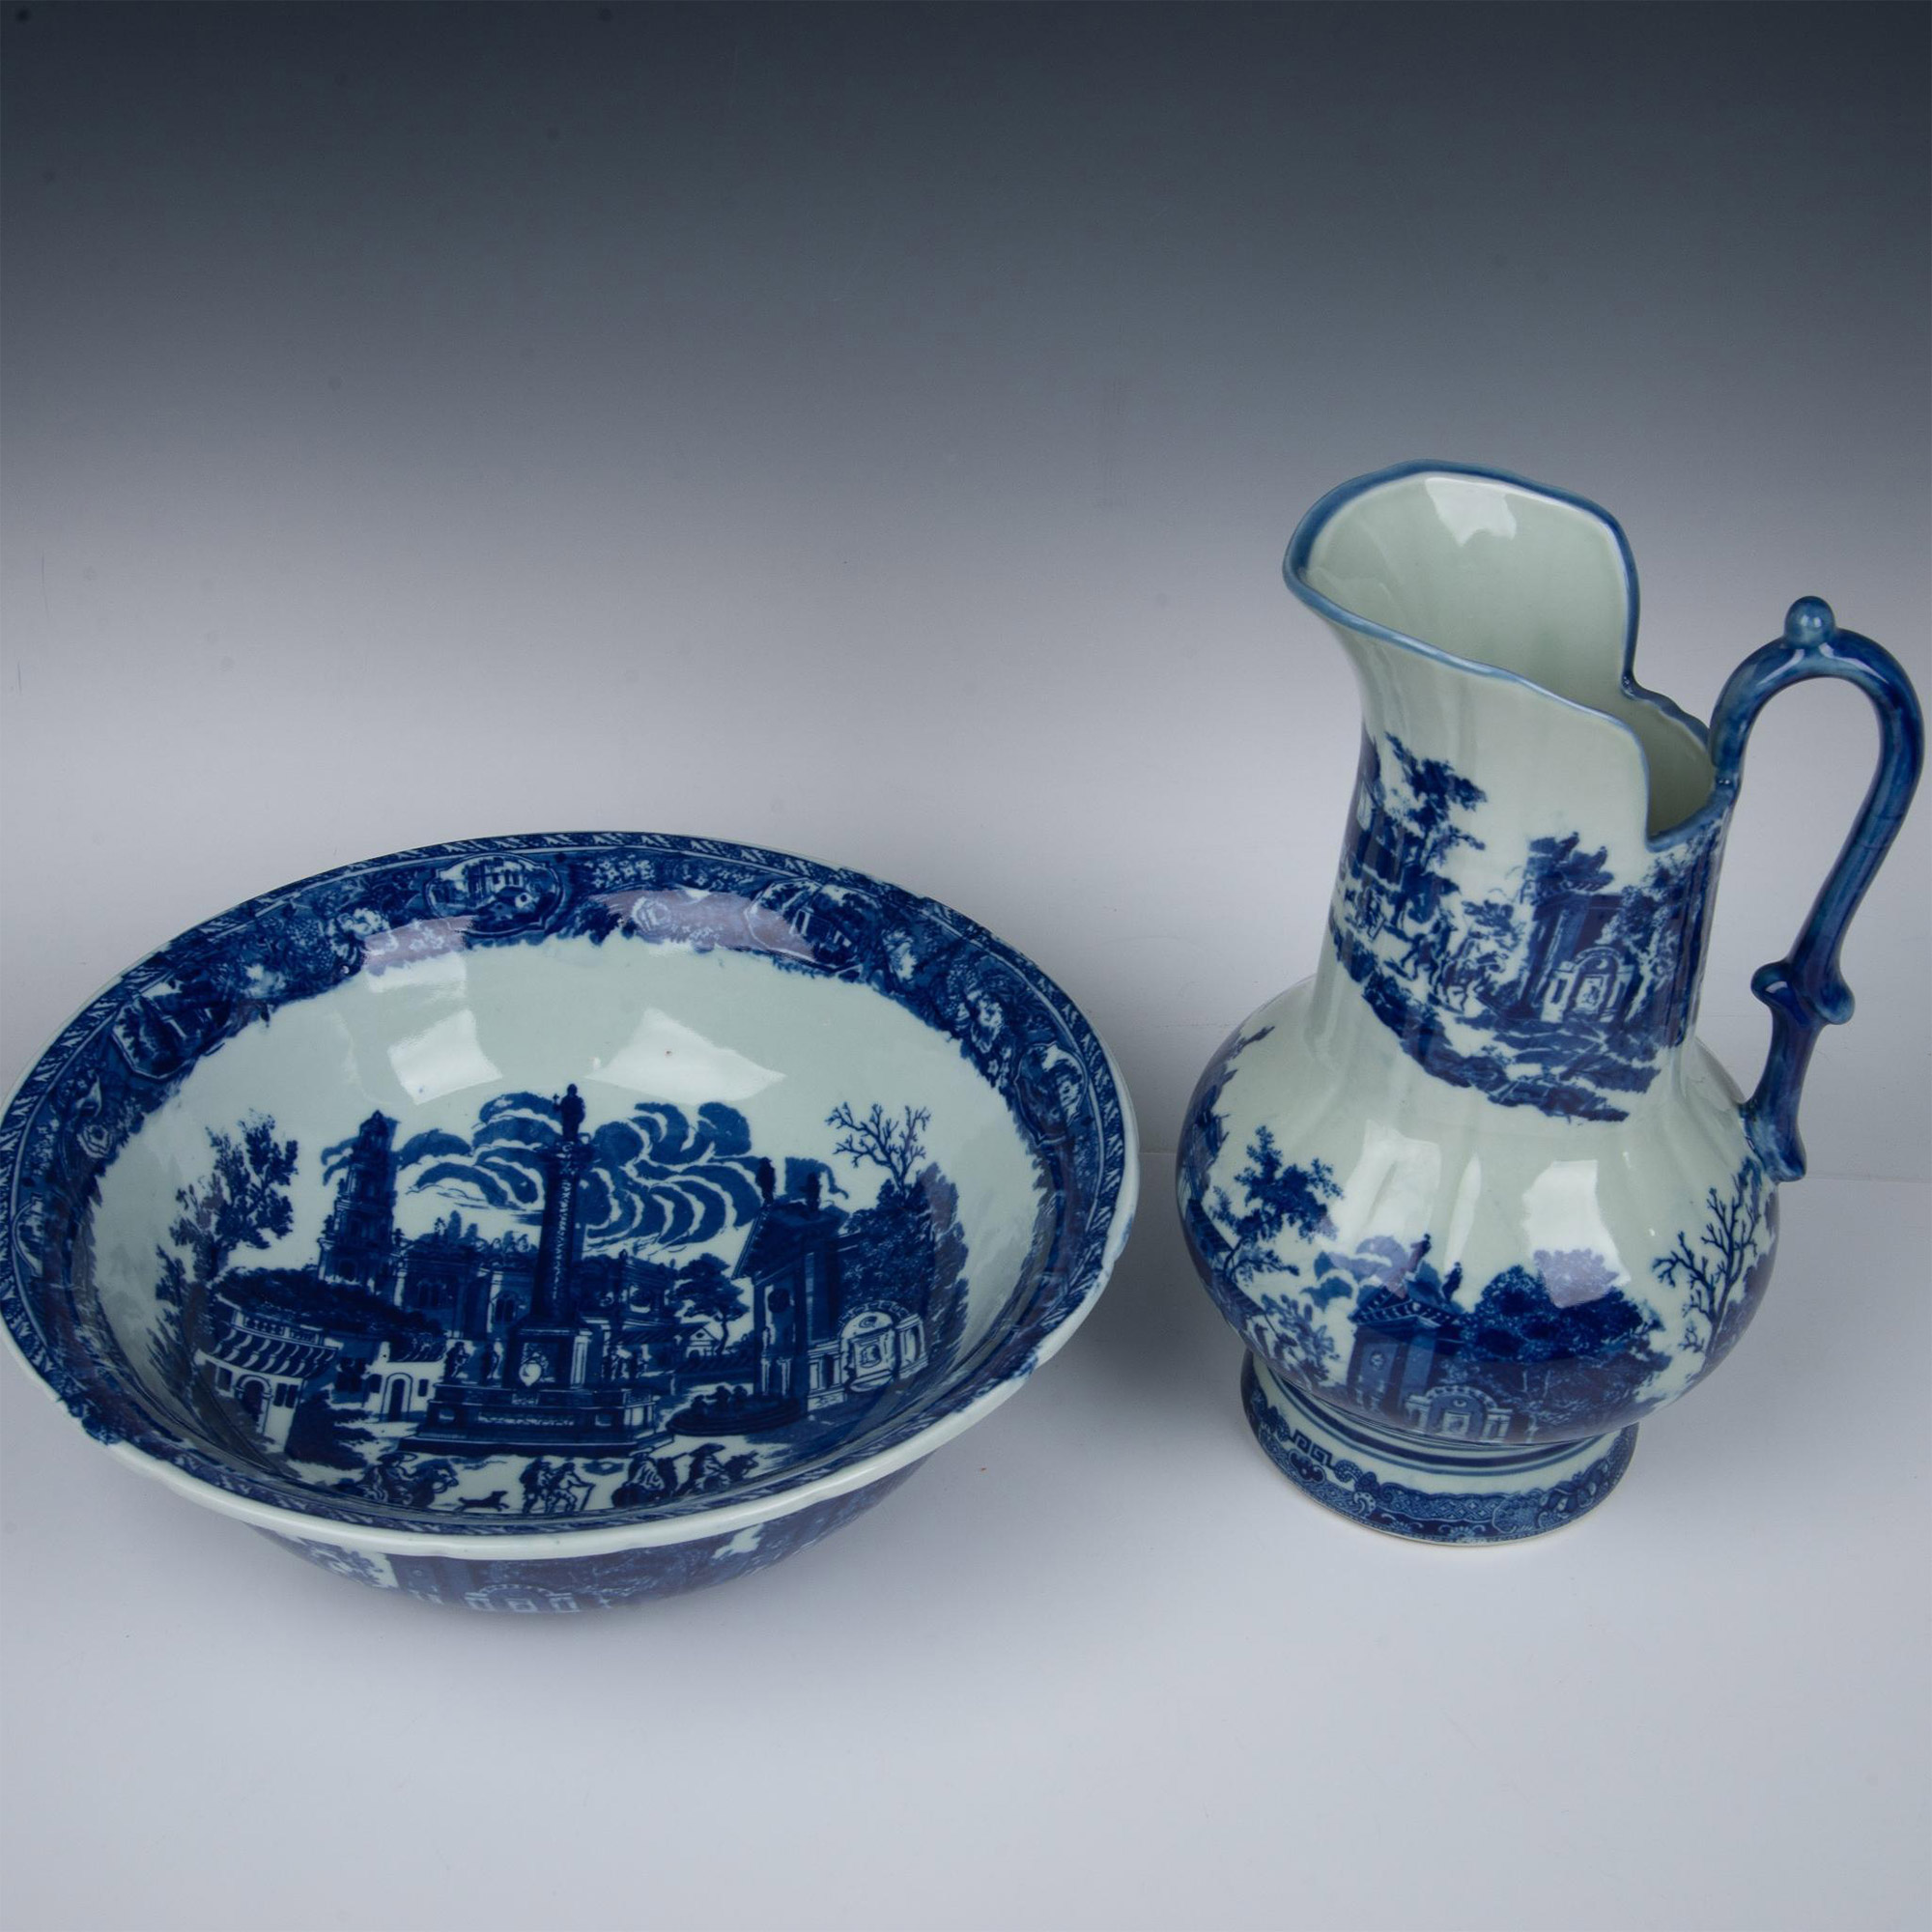 2pc Victoria Ware Ironstone Blue and White Pitcher and Bowl - Image 2 of 5